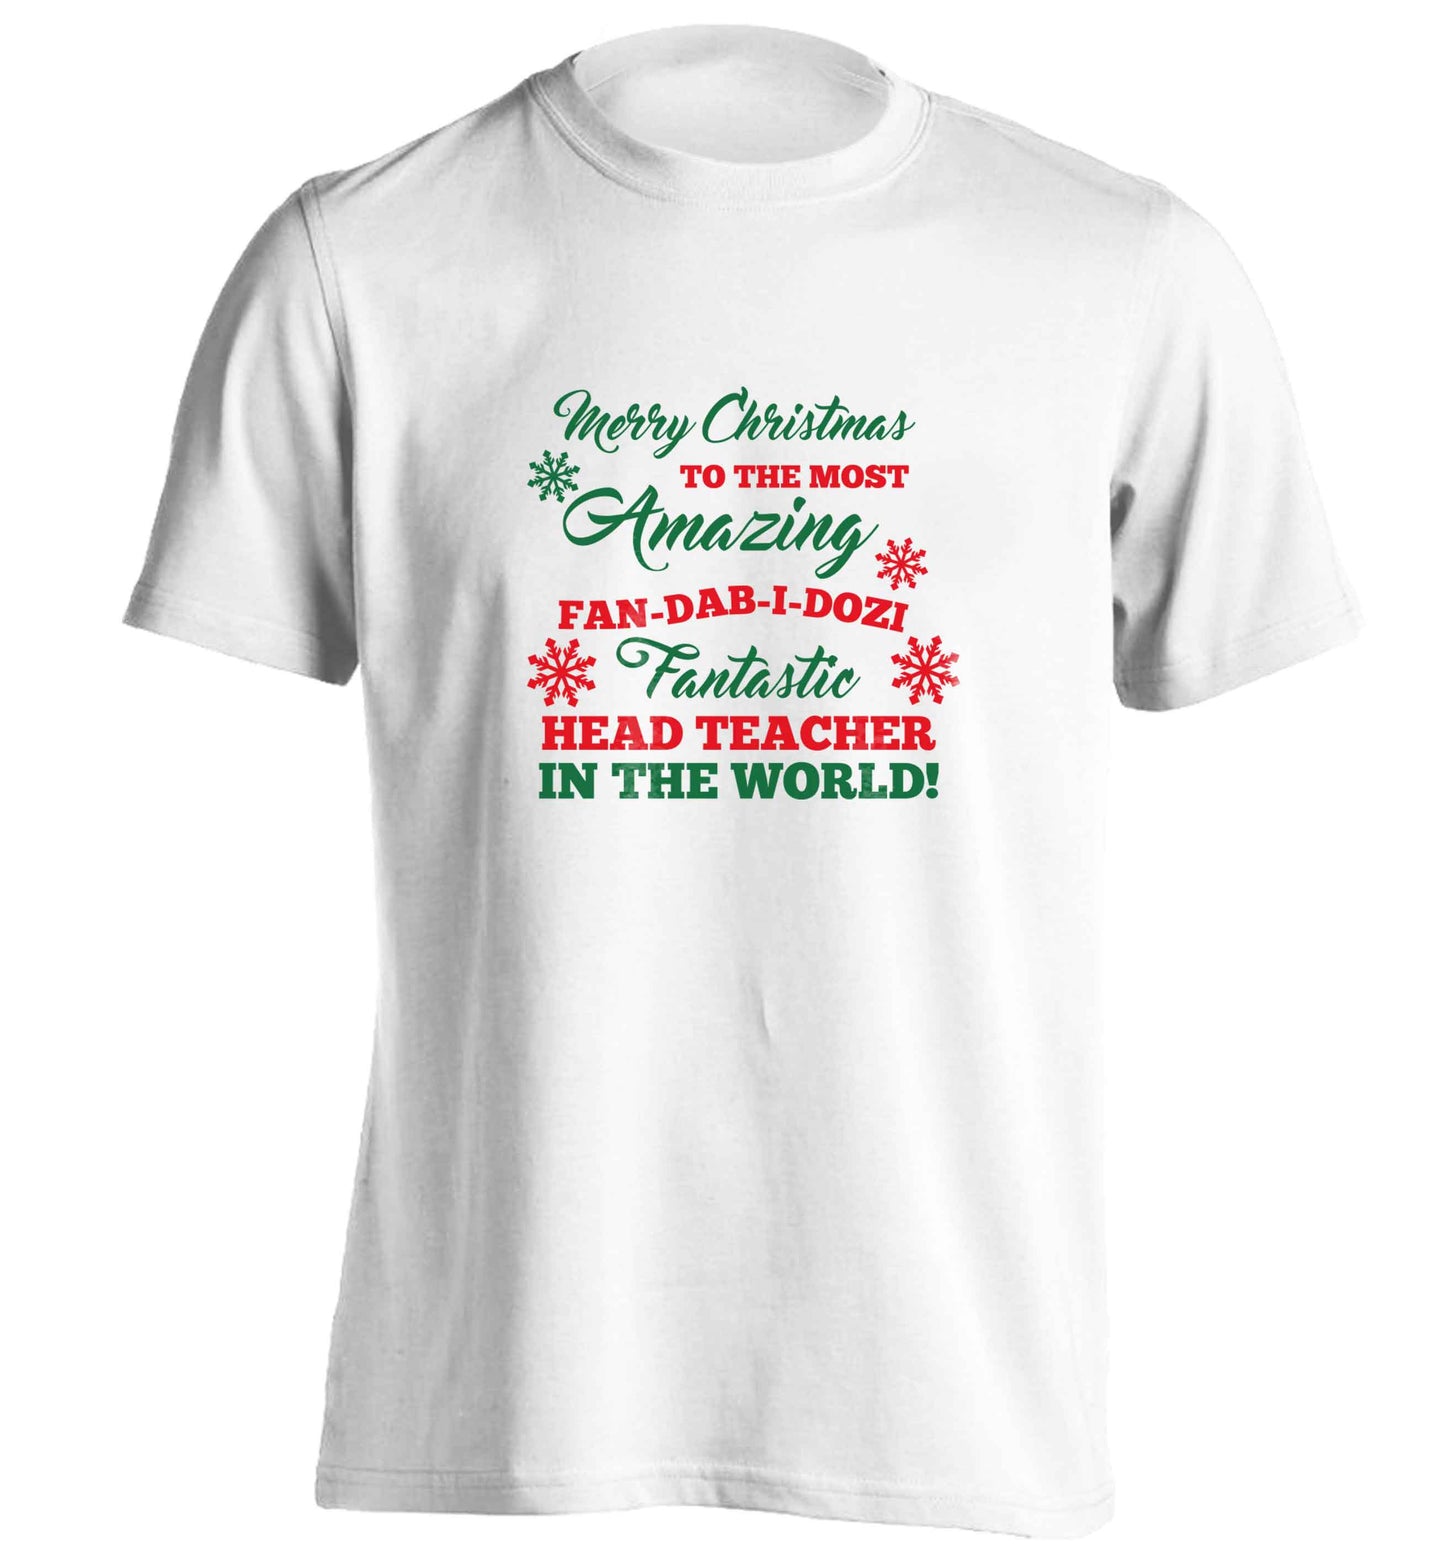 Merry Christmas to the most amazing fan-dab-i-dozi fantasic head teacher in the world adults unisex white Tshirt 2XL